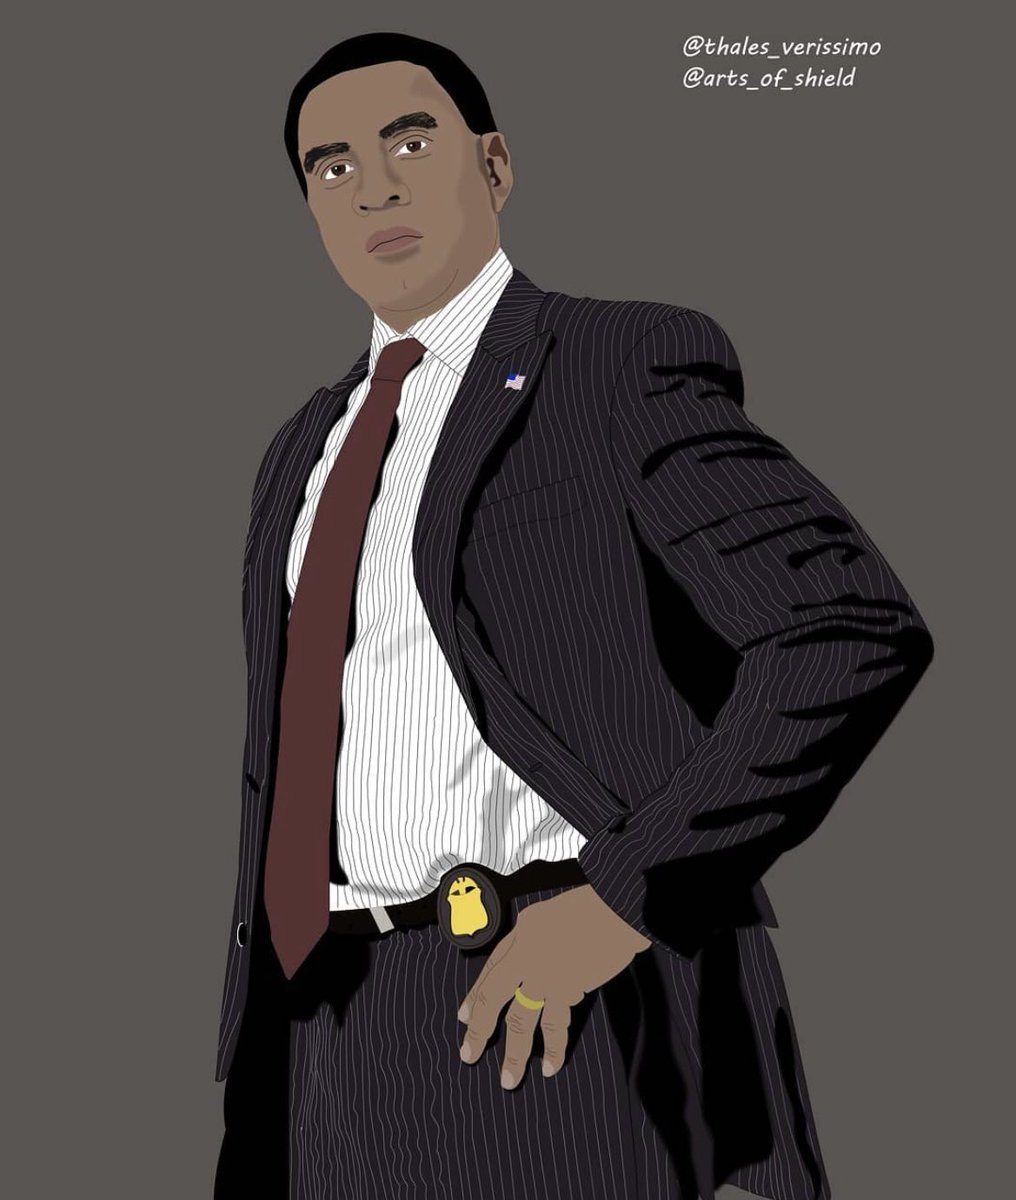 #FanArtFriday of Harold Cooper brought to you by @arts_of_shield. I hope everyone has a great weekend! P.S. Don’t forget to tune in to an all new episode of #TheBlacklist this Sunday.